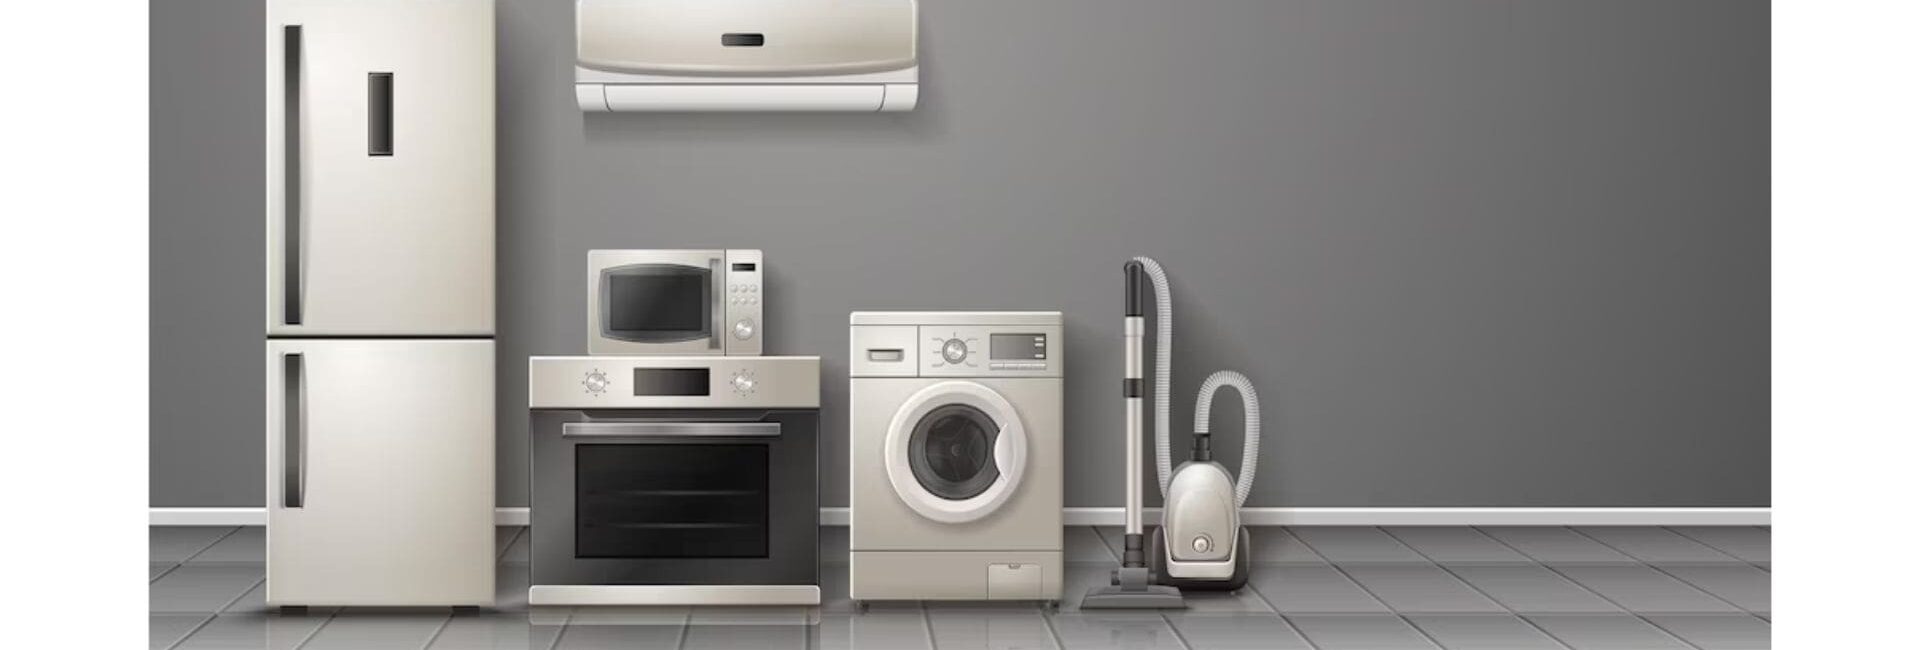 Bhatti Trading Company - Home Appliance Dealer in Hisar